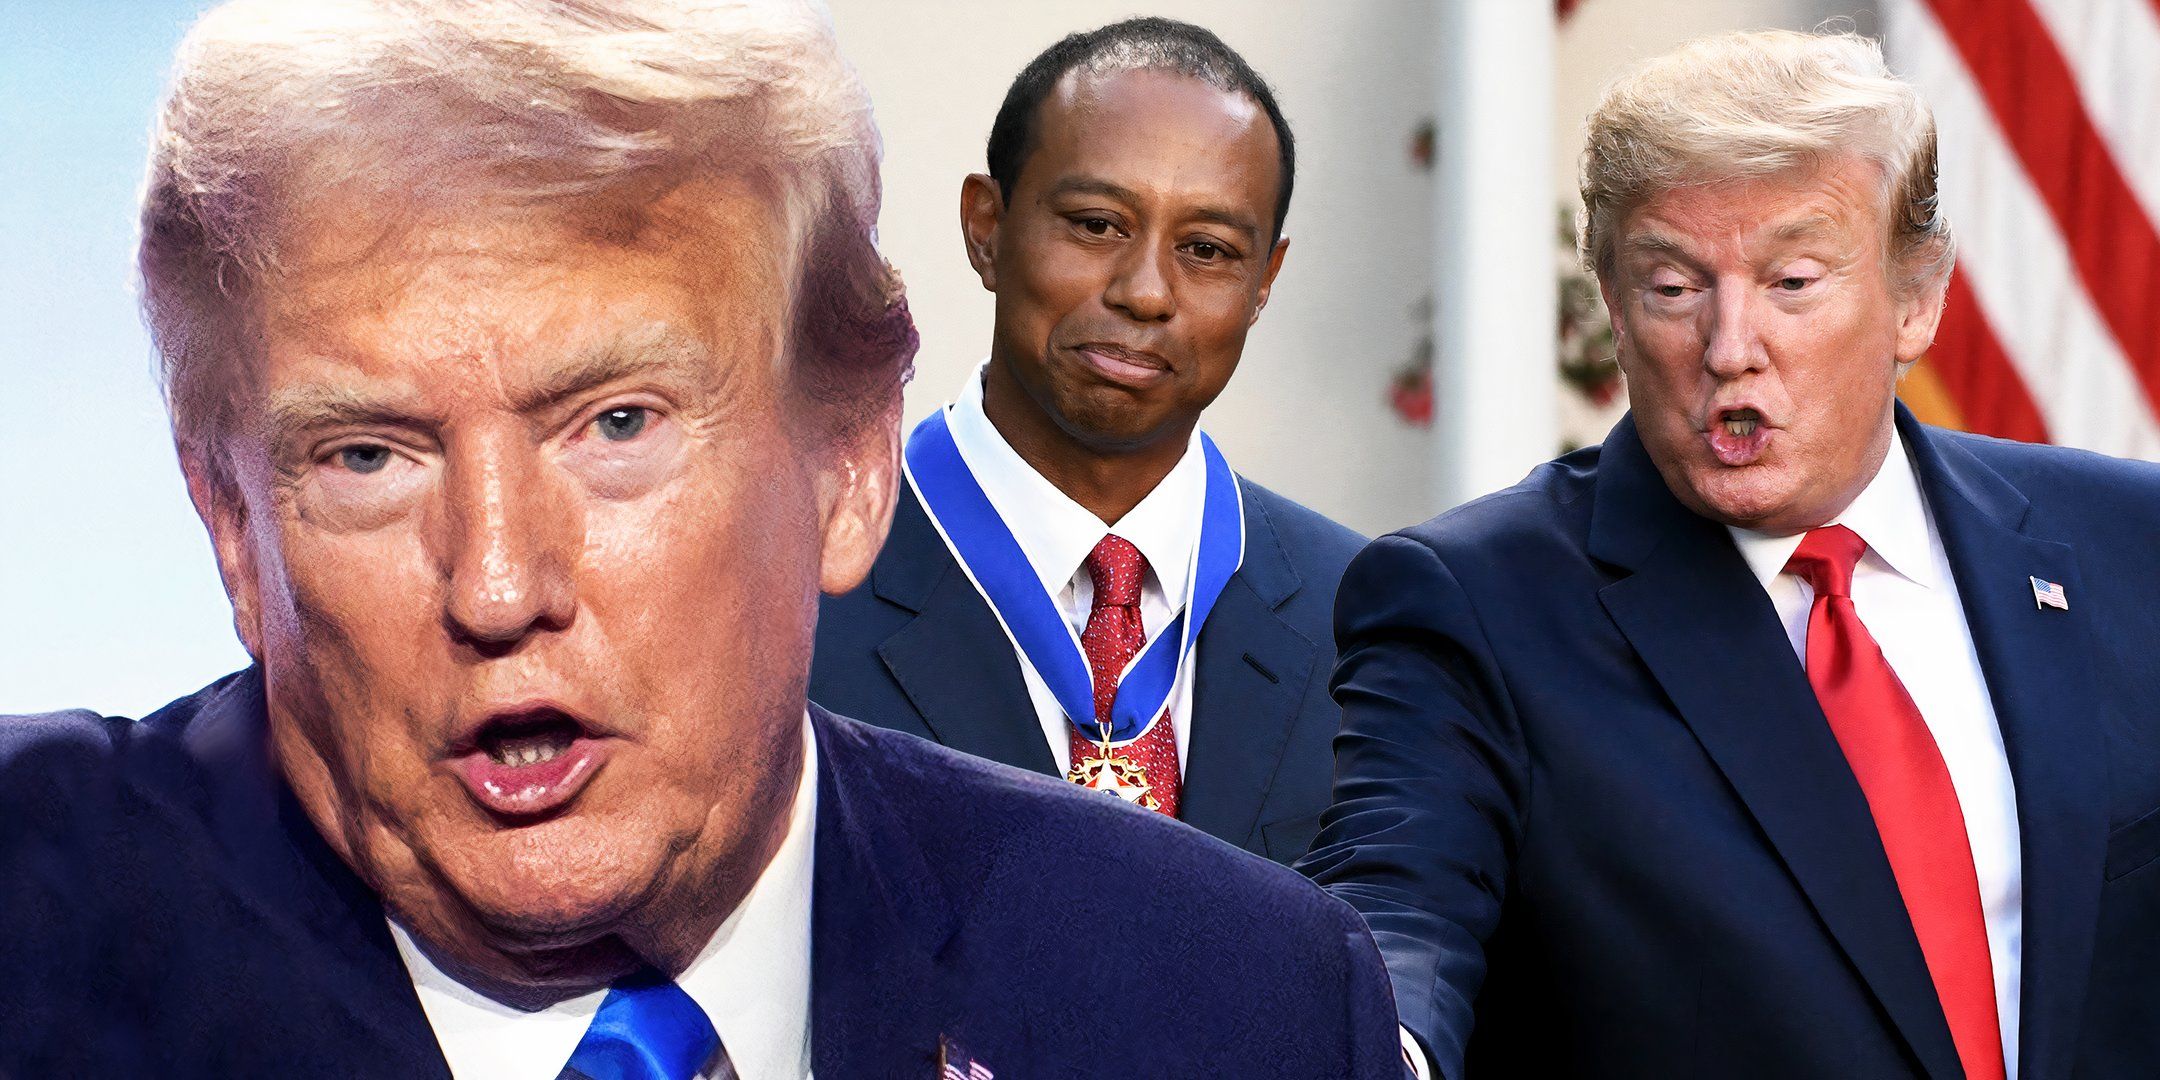 Donald Trump Was Applauded When He Joked About Tiger Woods